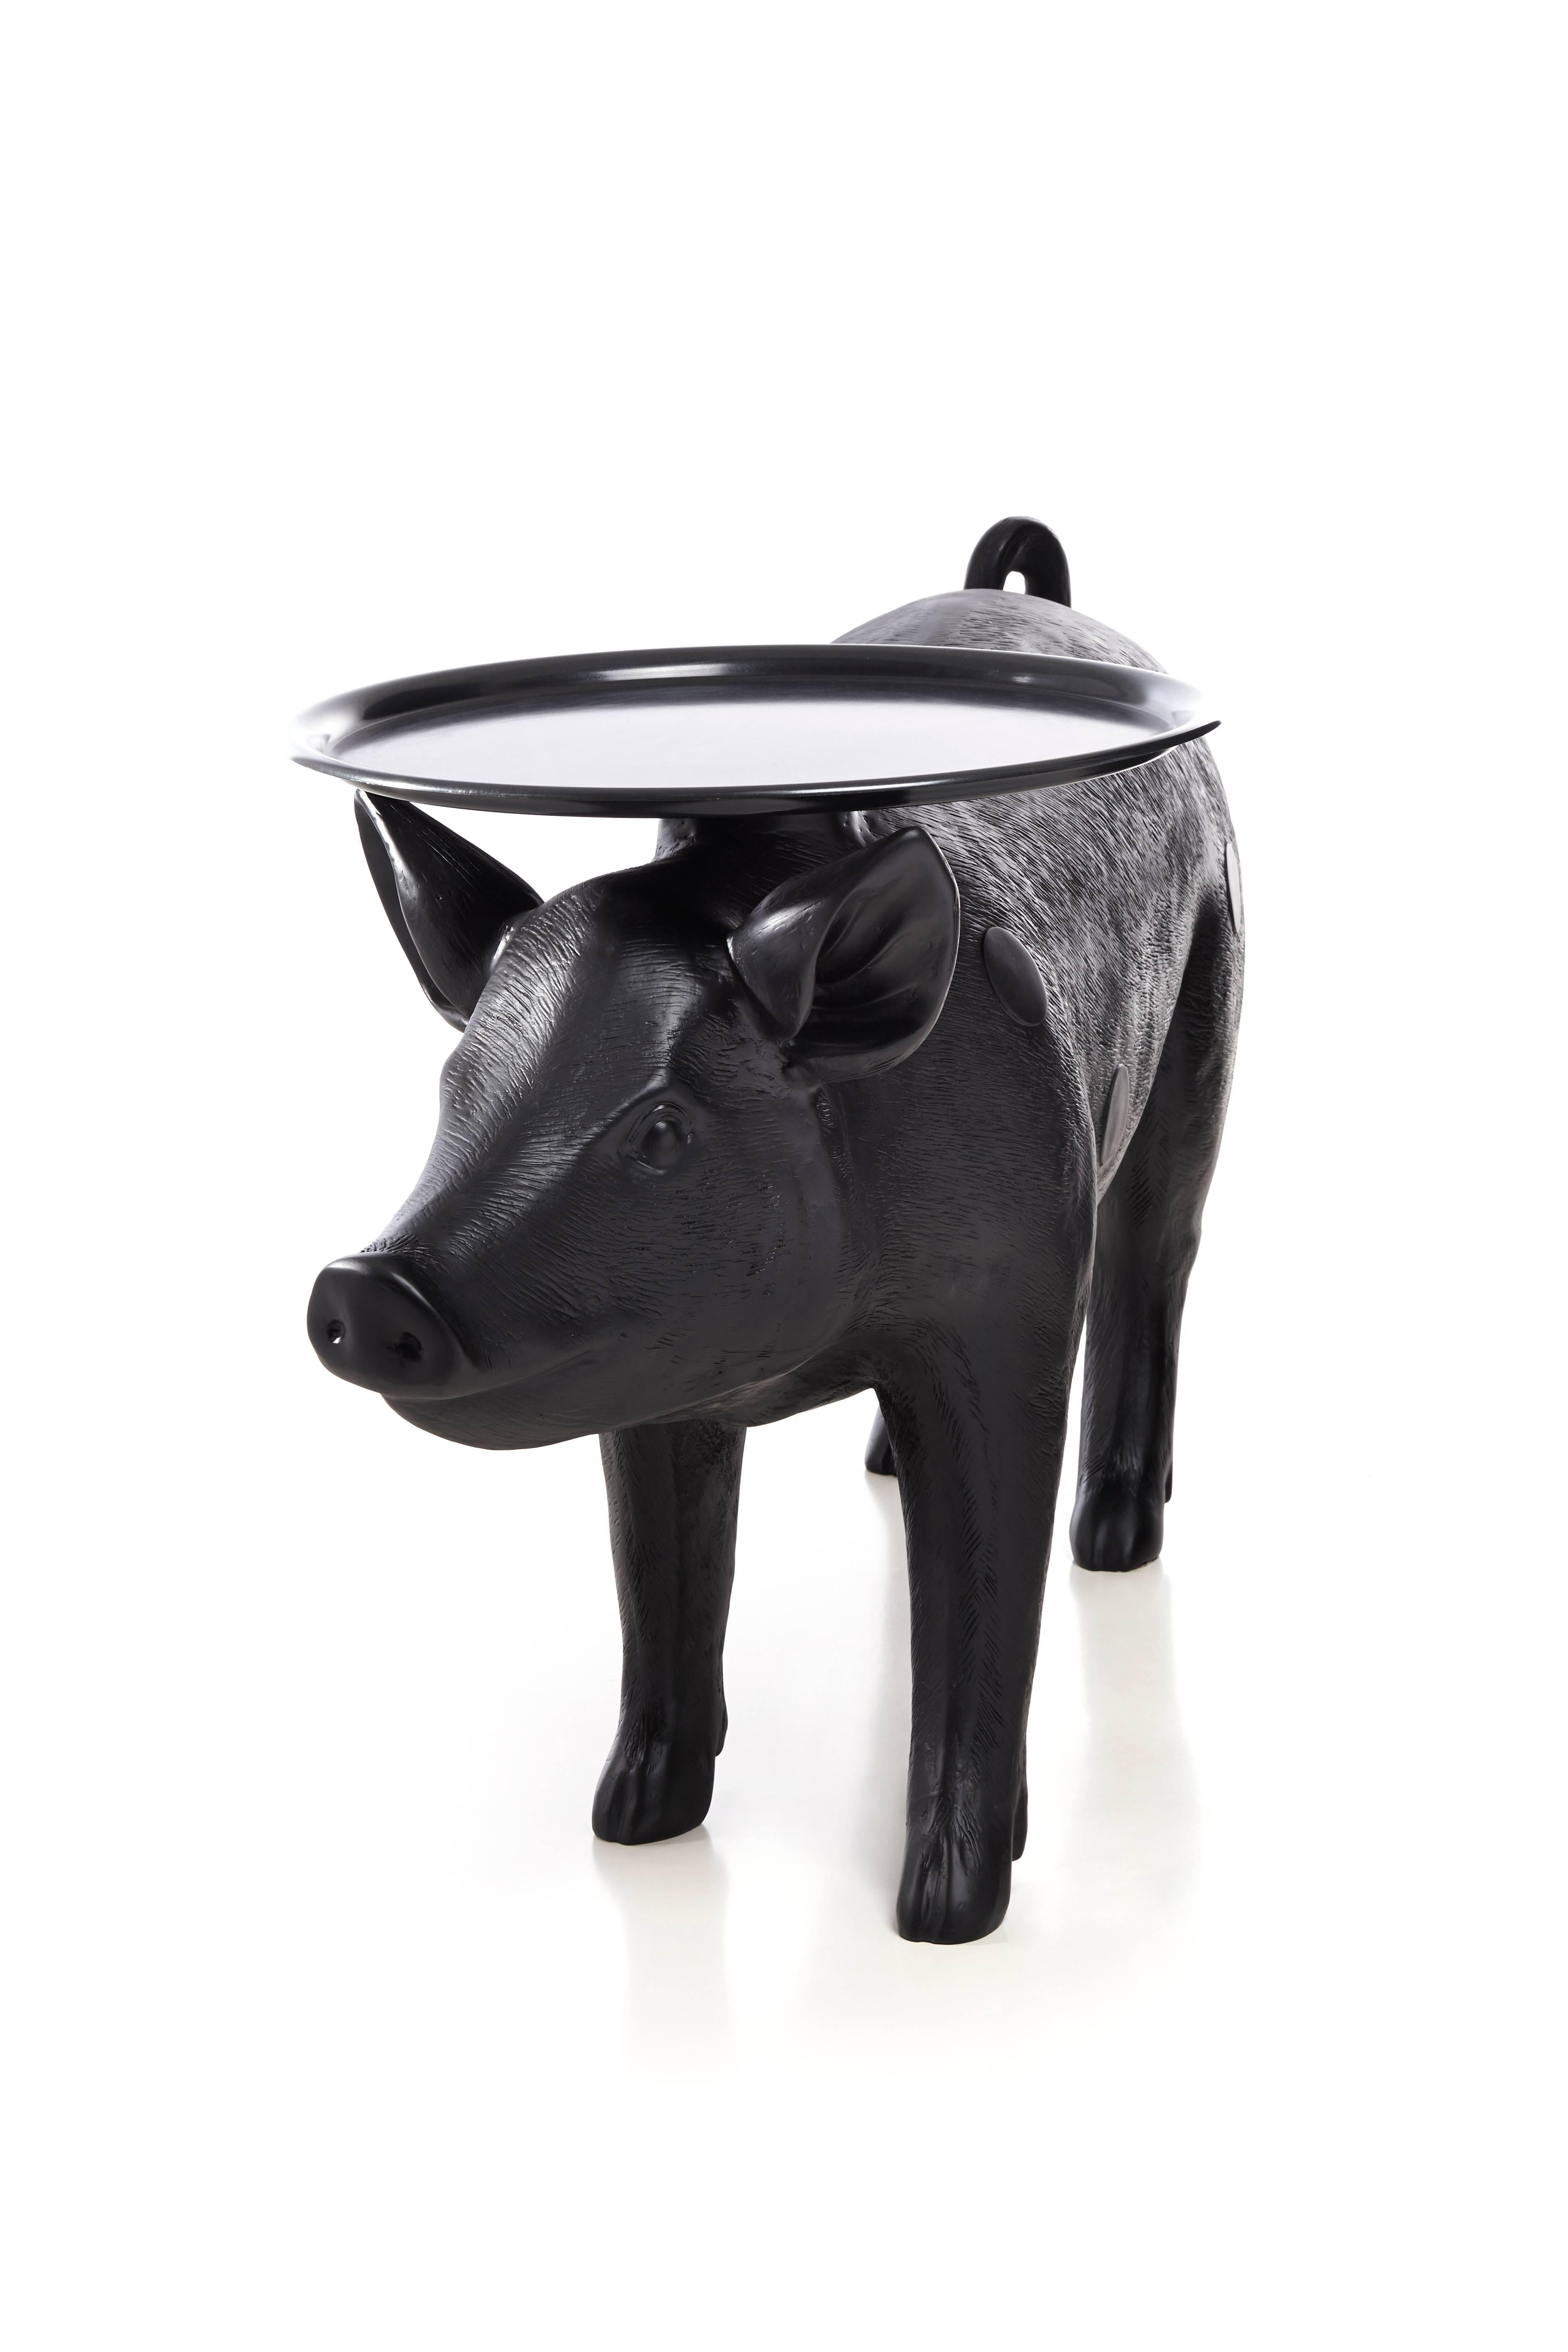 Modern Moooi Pig Table by Front Design For Sale